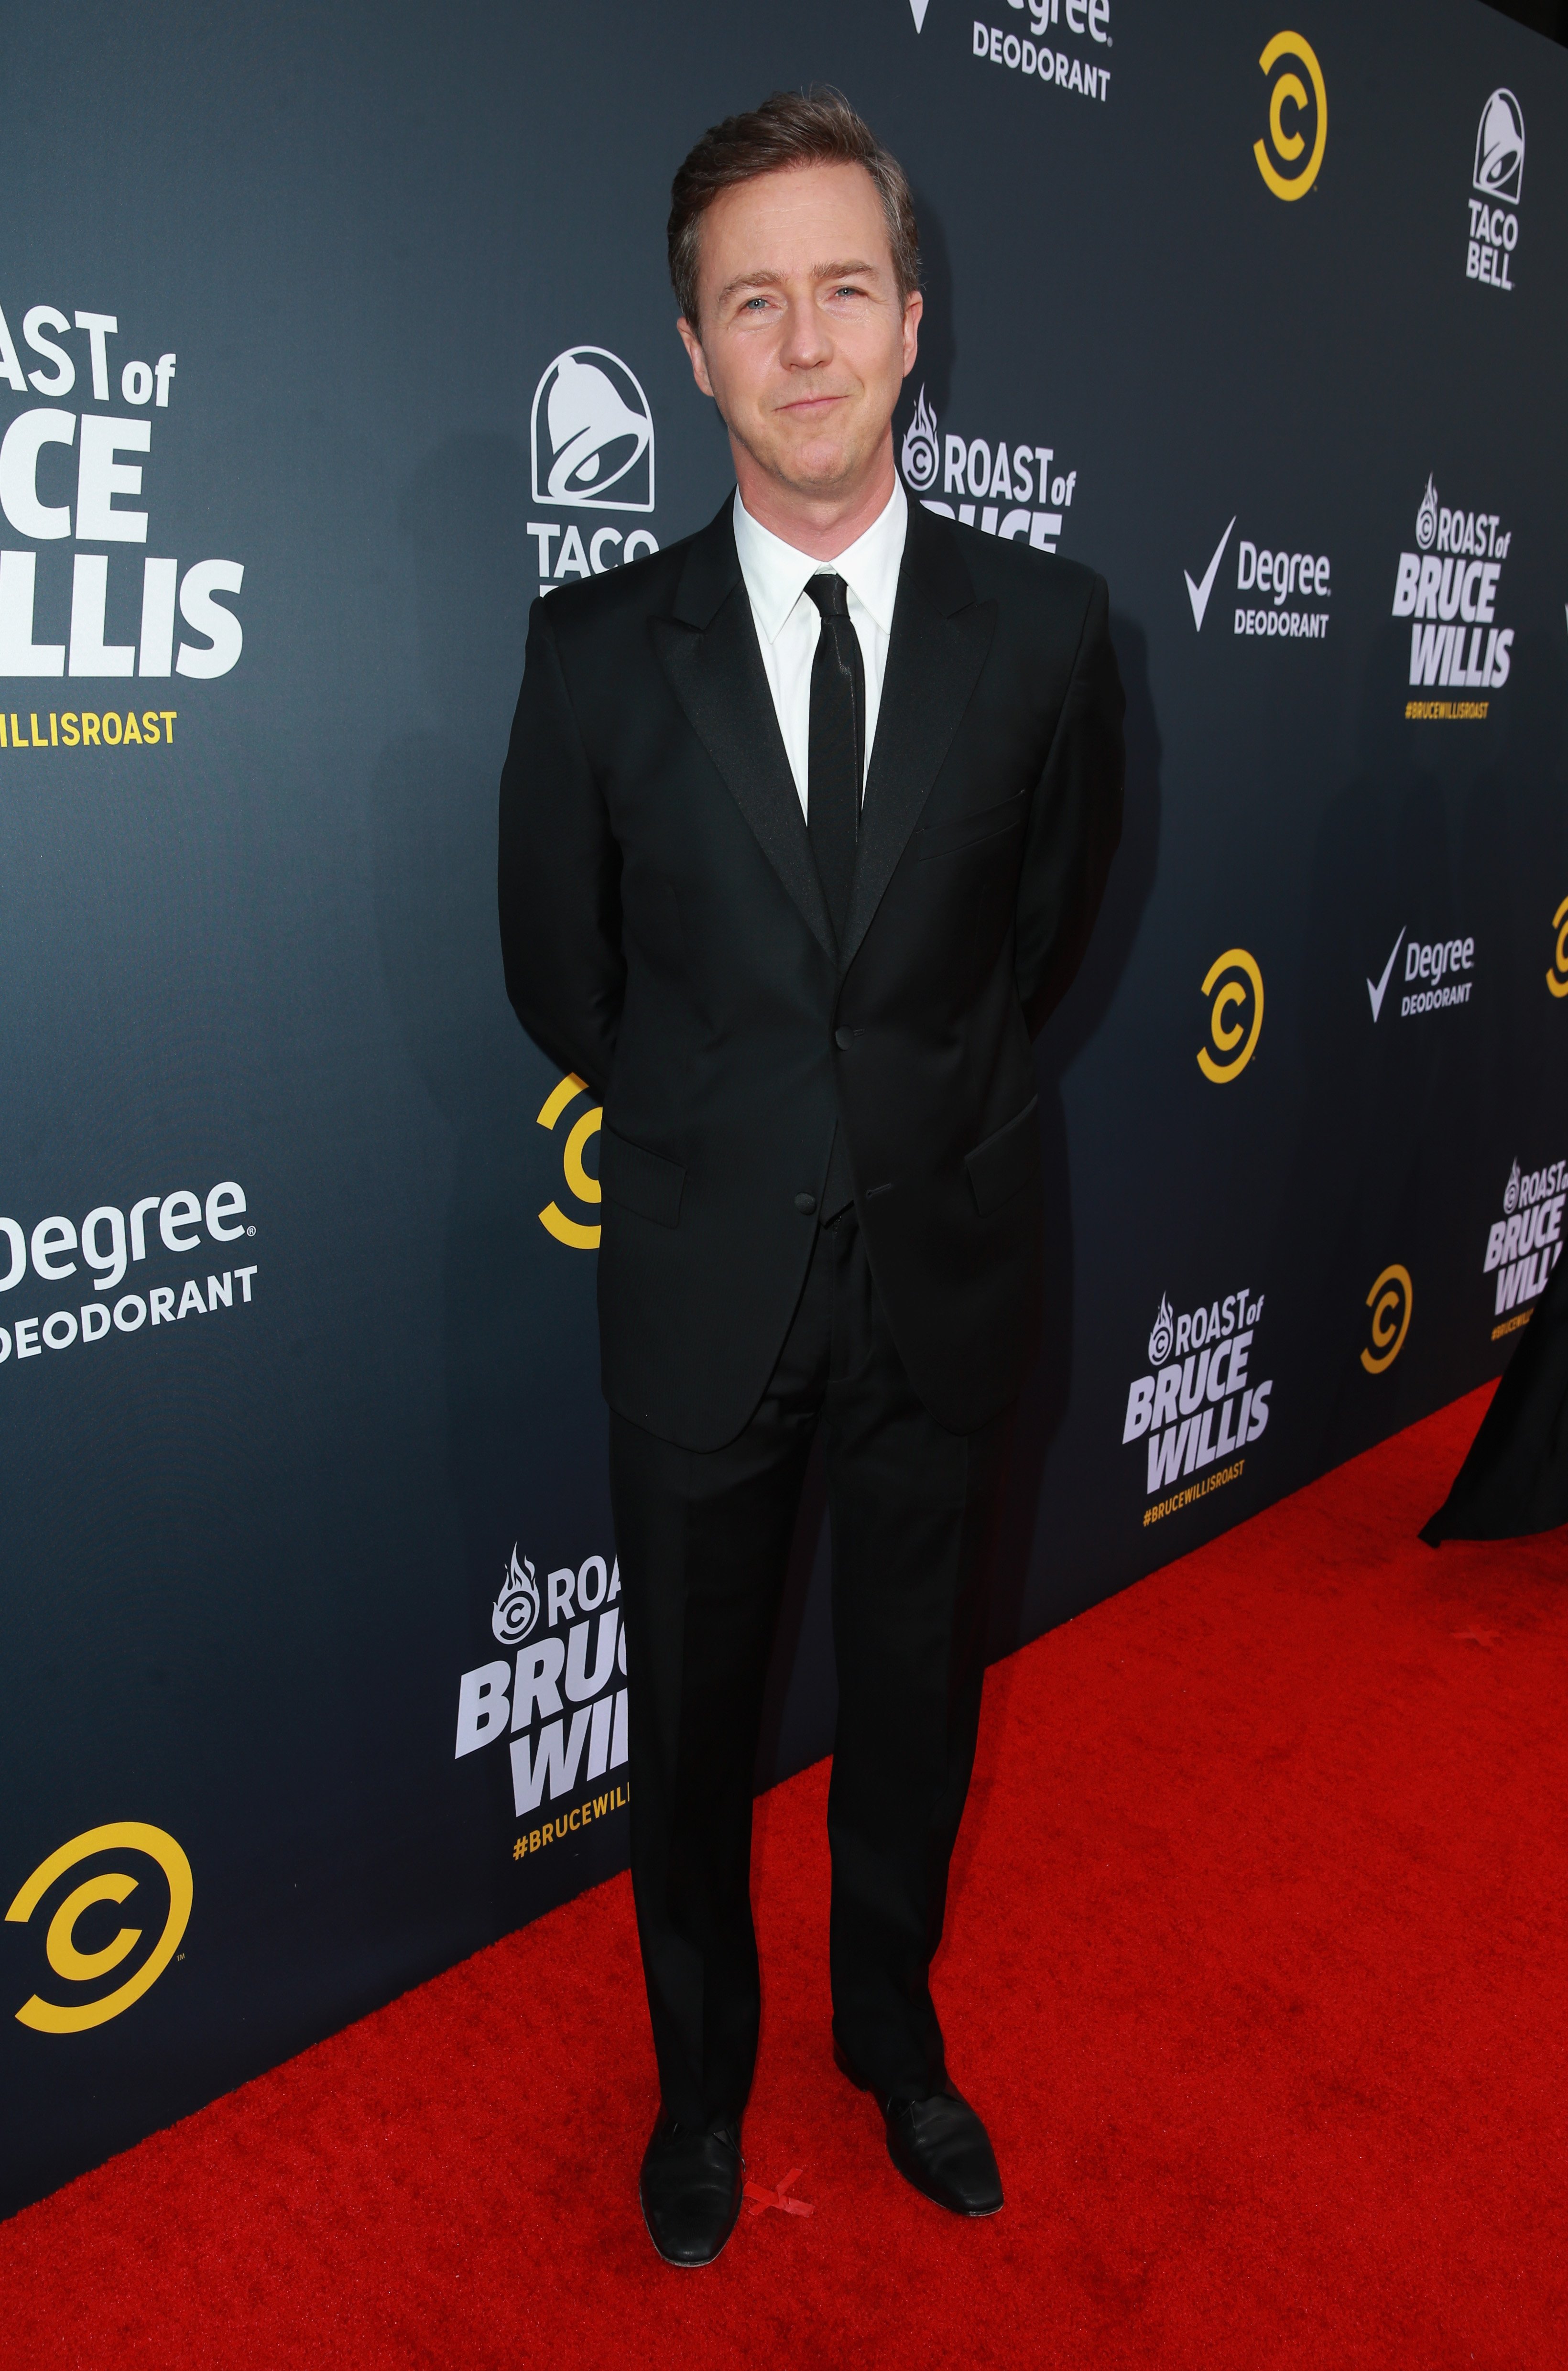 Edward Norton attends the Comedy Central Roast of Bruce Willis in Los Angeles, California on July 14, 2018 | Photo: Getty Images